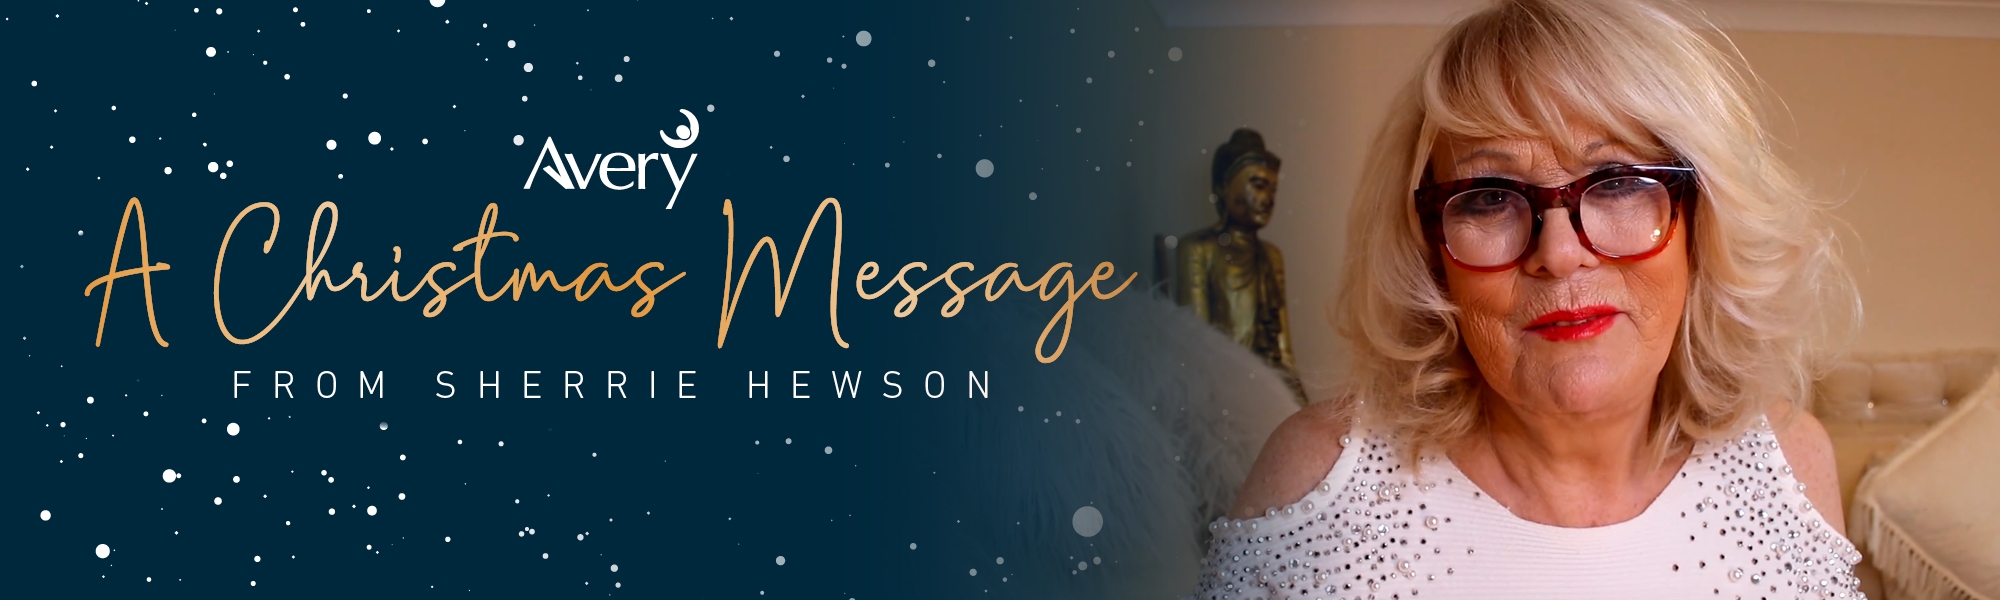 Christmas Message from Sherrie Hewson